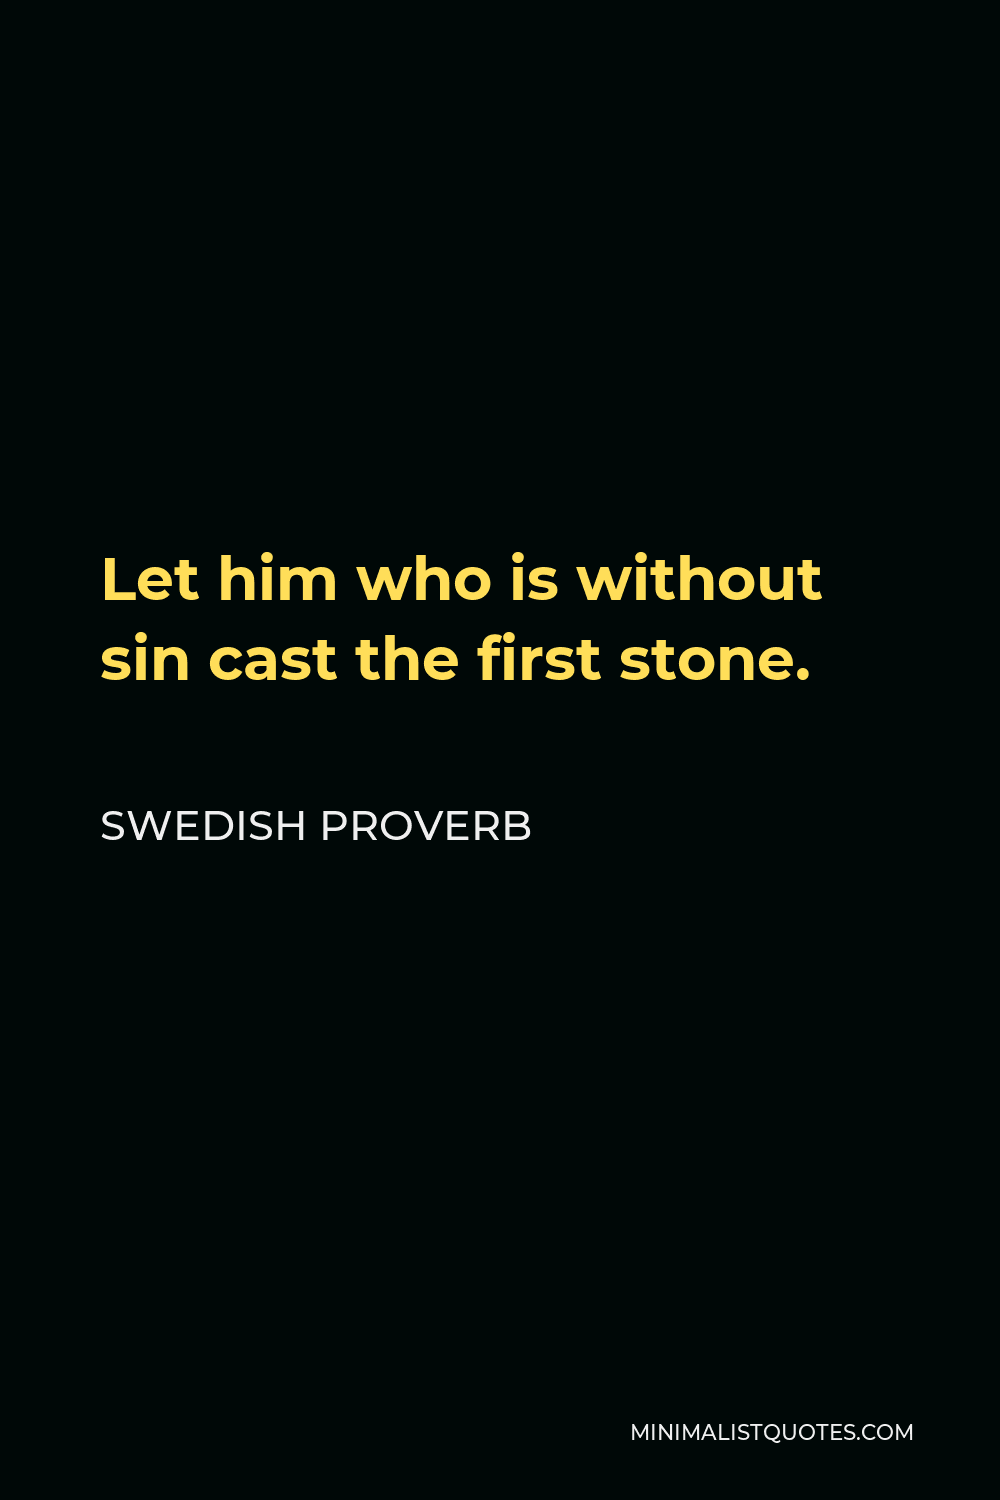 Swedish Proverb Quote - Let him who is without sin cast the first stone.